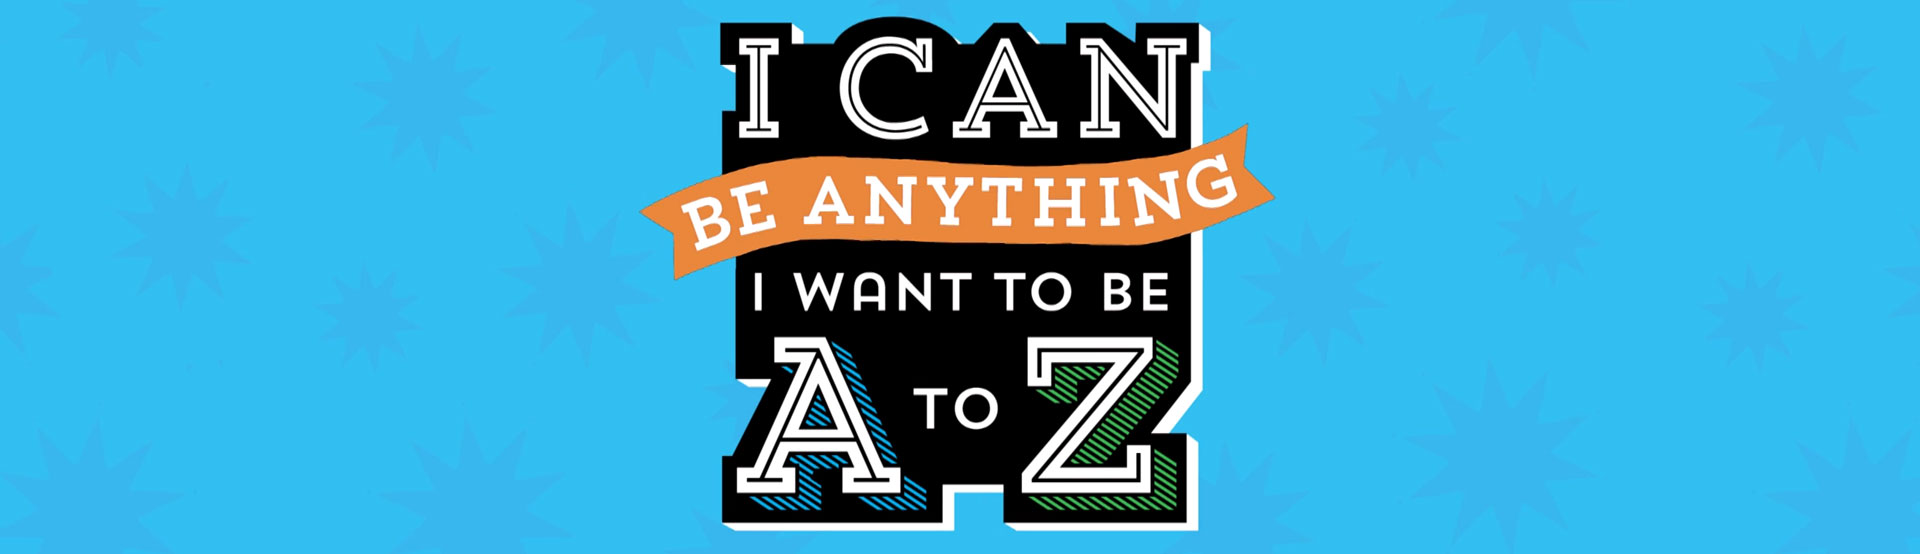 I Can Be Anything I Want to Be A to Z